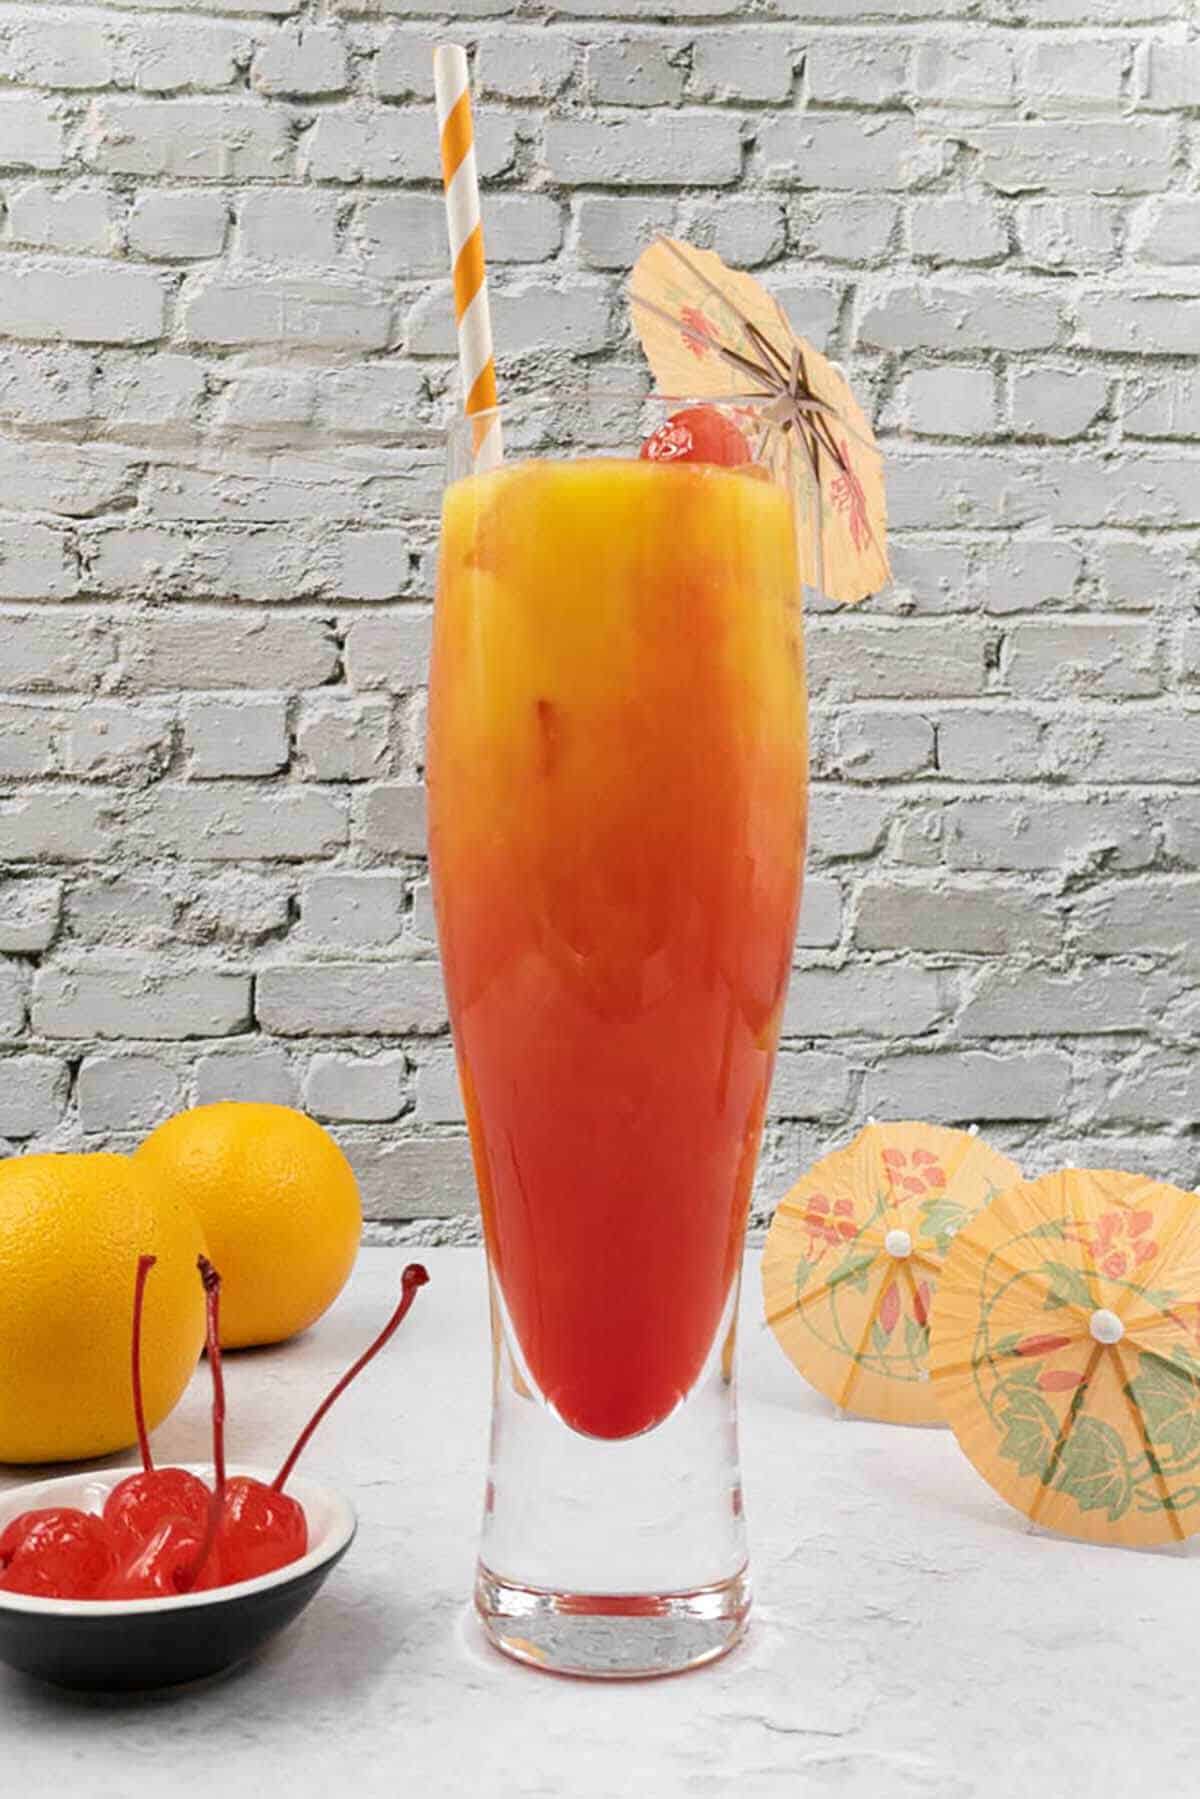 Get your weekend started right with this vodka sunrise recipe! - Splash ...